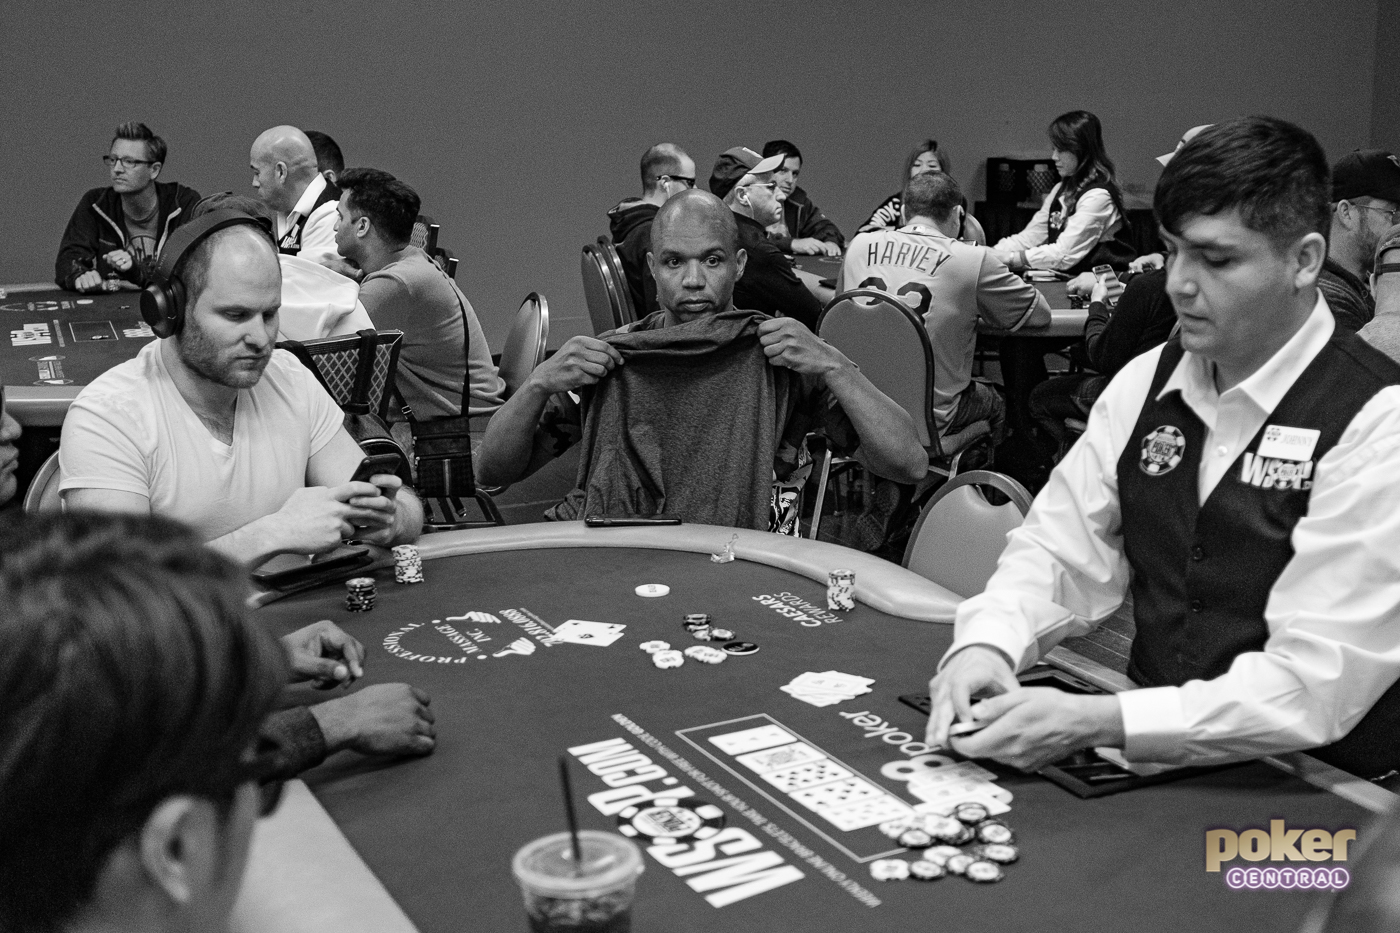 Moments before Phil Ivey's elimination from the 2019 WSOP Main Event.